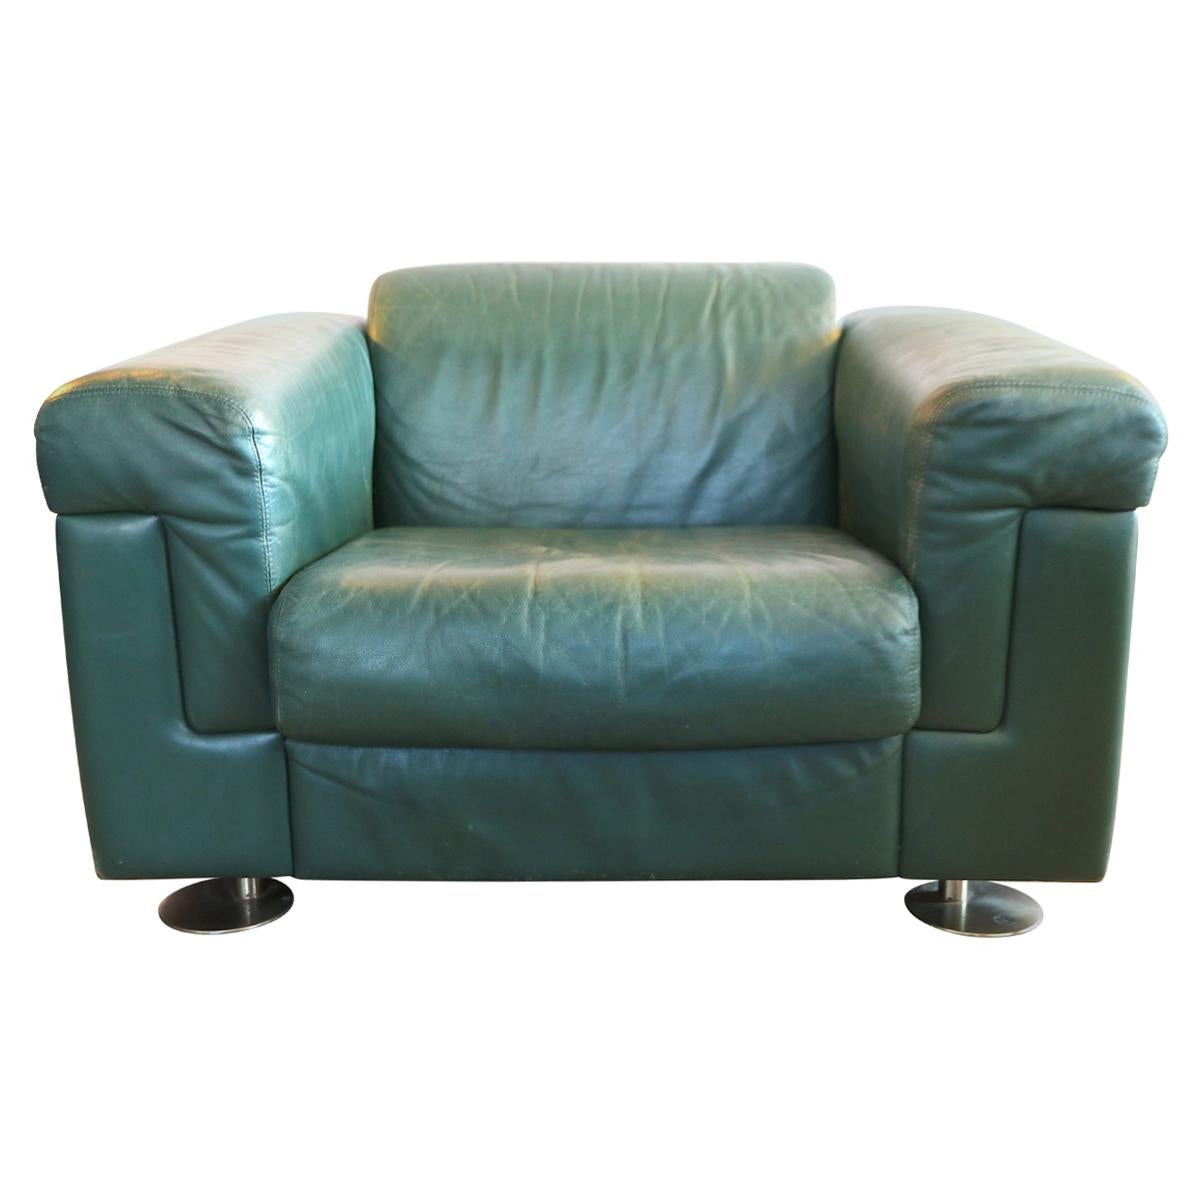 Valeria Borsani for Tecno Milano Large Lounge Chair Model D120 in Green Leather For Sale